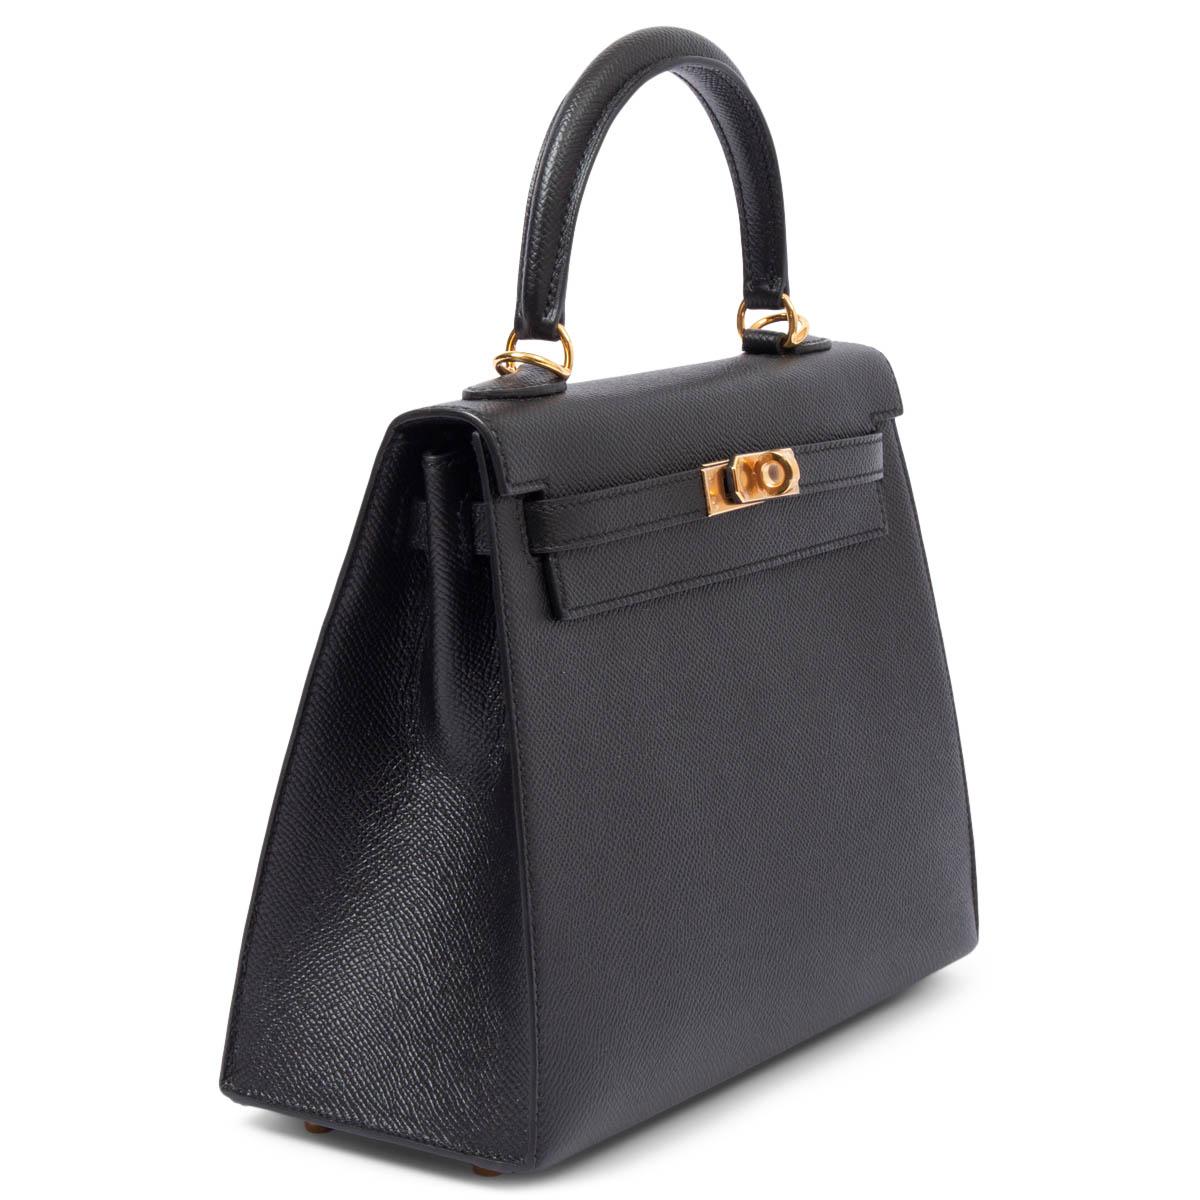 100% authentic Hermès Kelly 25 Sellier bag in Noir (black) Veau Epsom leather with gold-plated hardware. Lined in Chevre (goat skin) with an open pocket against the front and a zipper pocket against the back. Has been carried once and with a soft